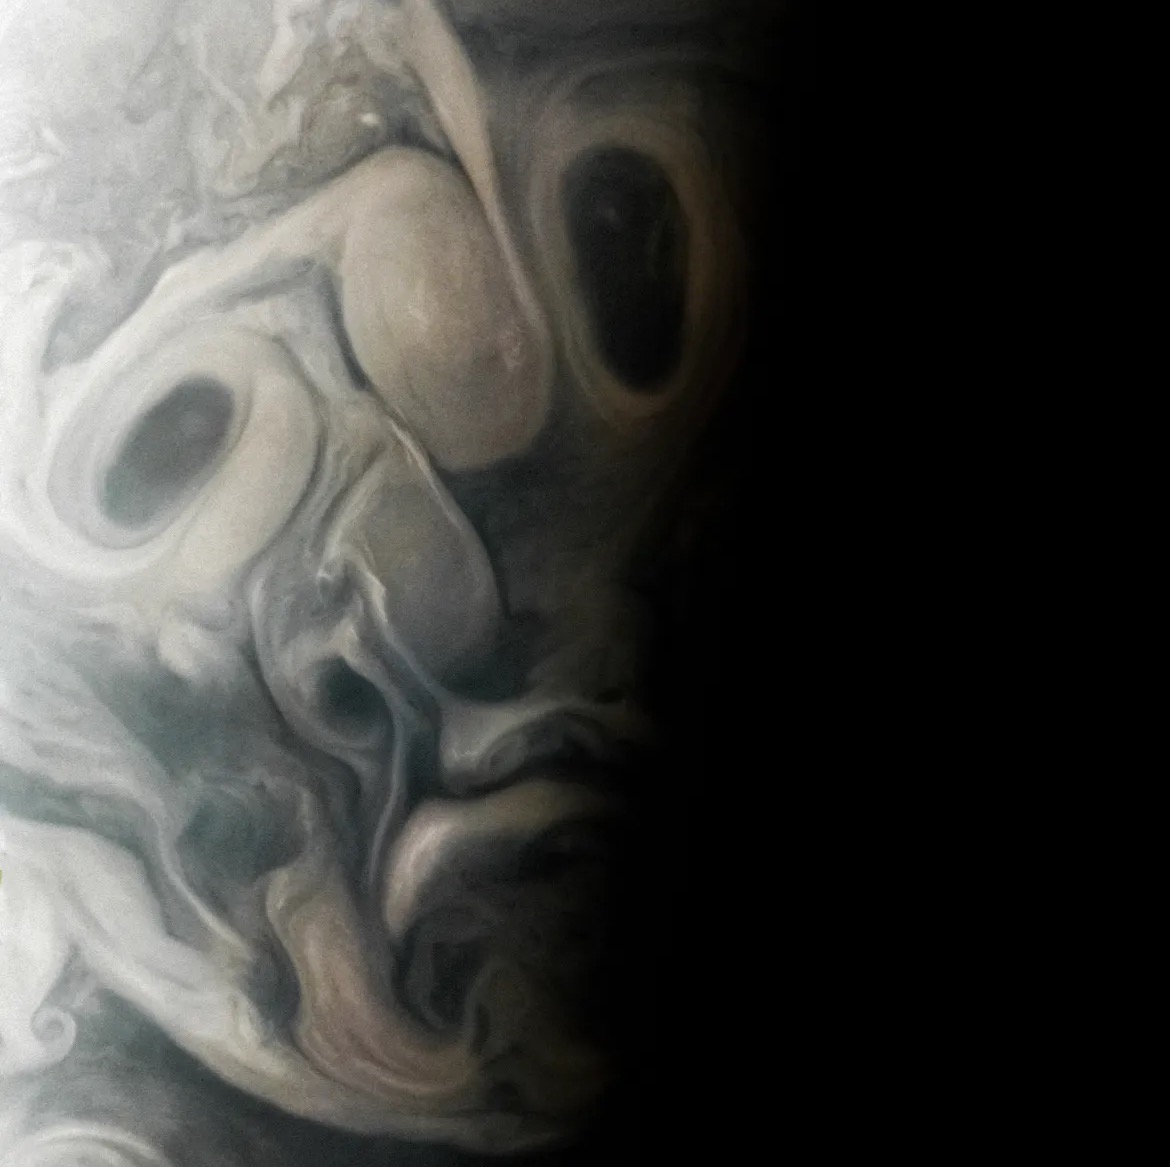 NASA shared this image of clouds and storms on Jupiter that resemble a face. Credit: NASA/JPL-Caltech/SwRI/MSSS Image processing by Vladimir Tarasov